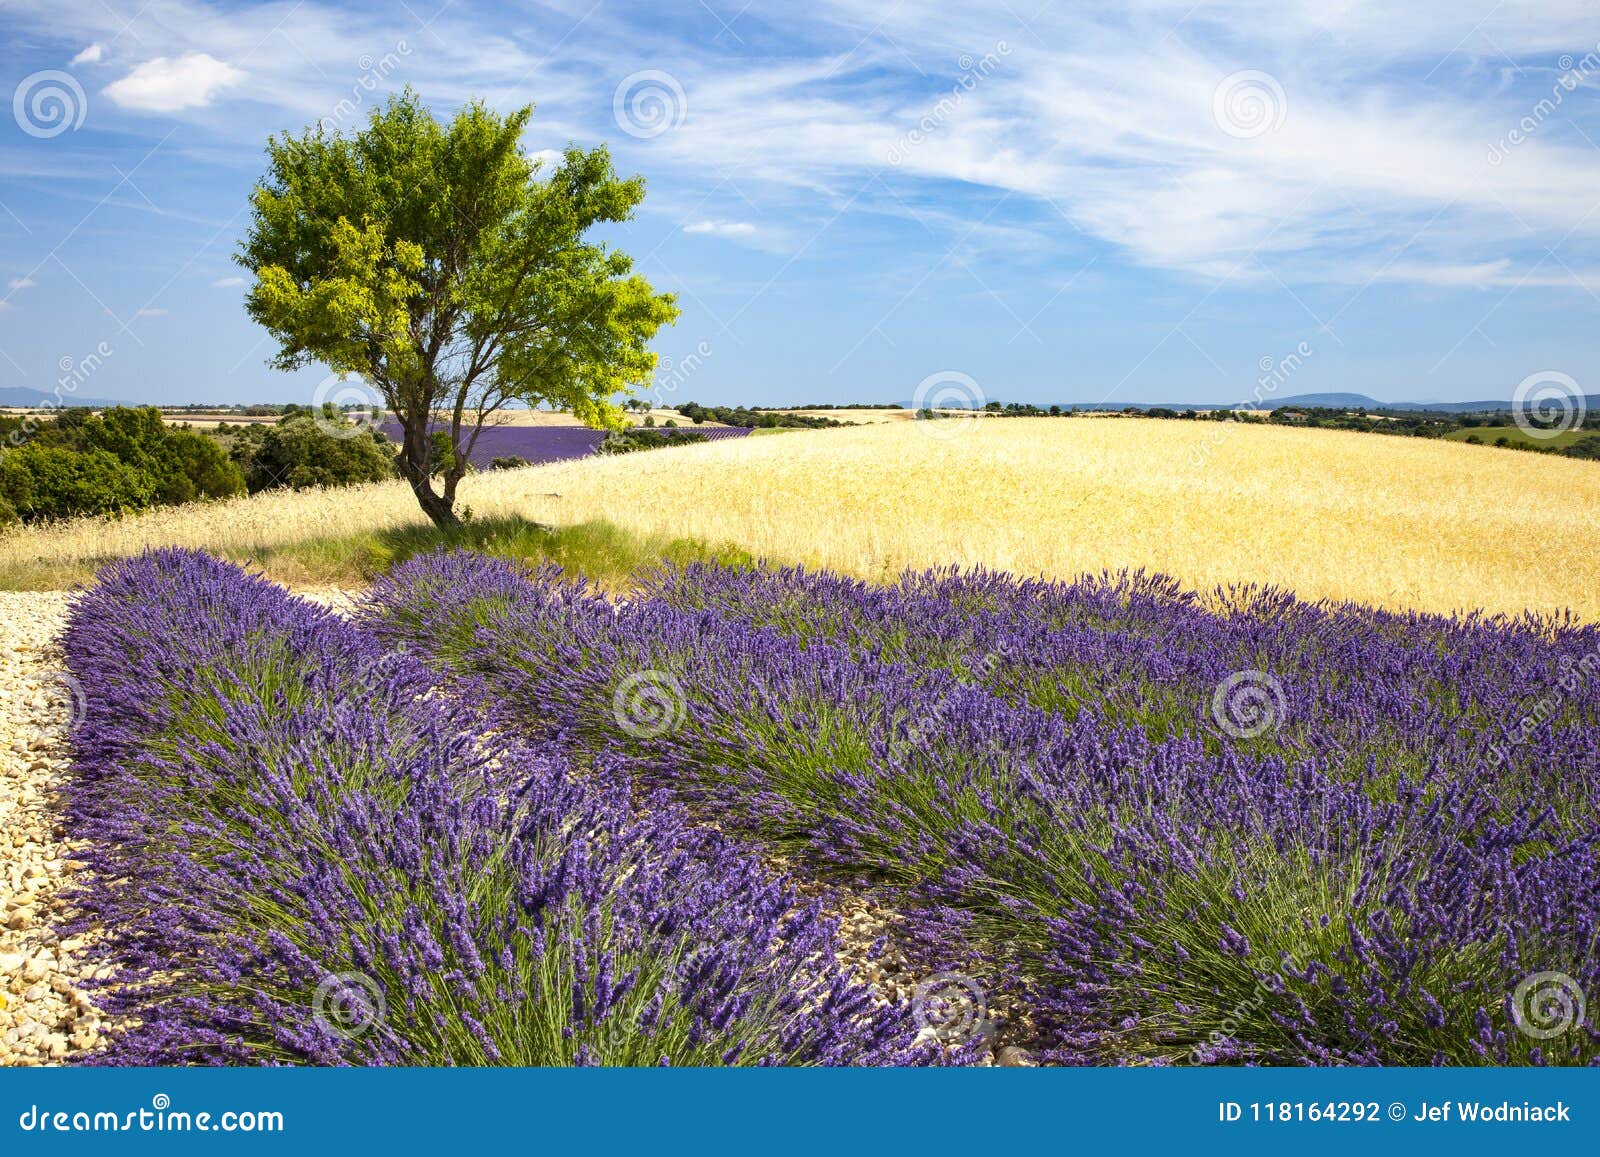 lavenders in provence